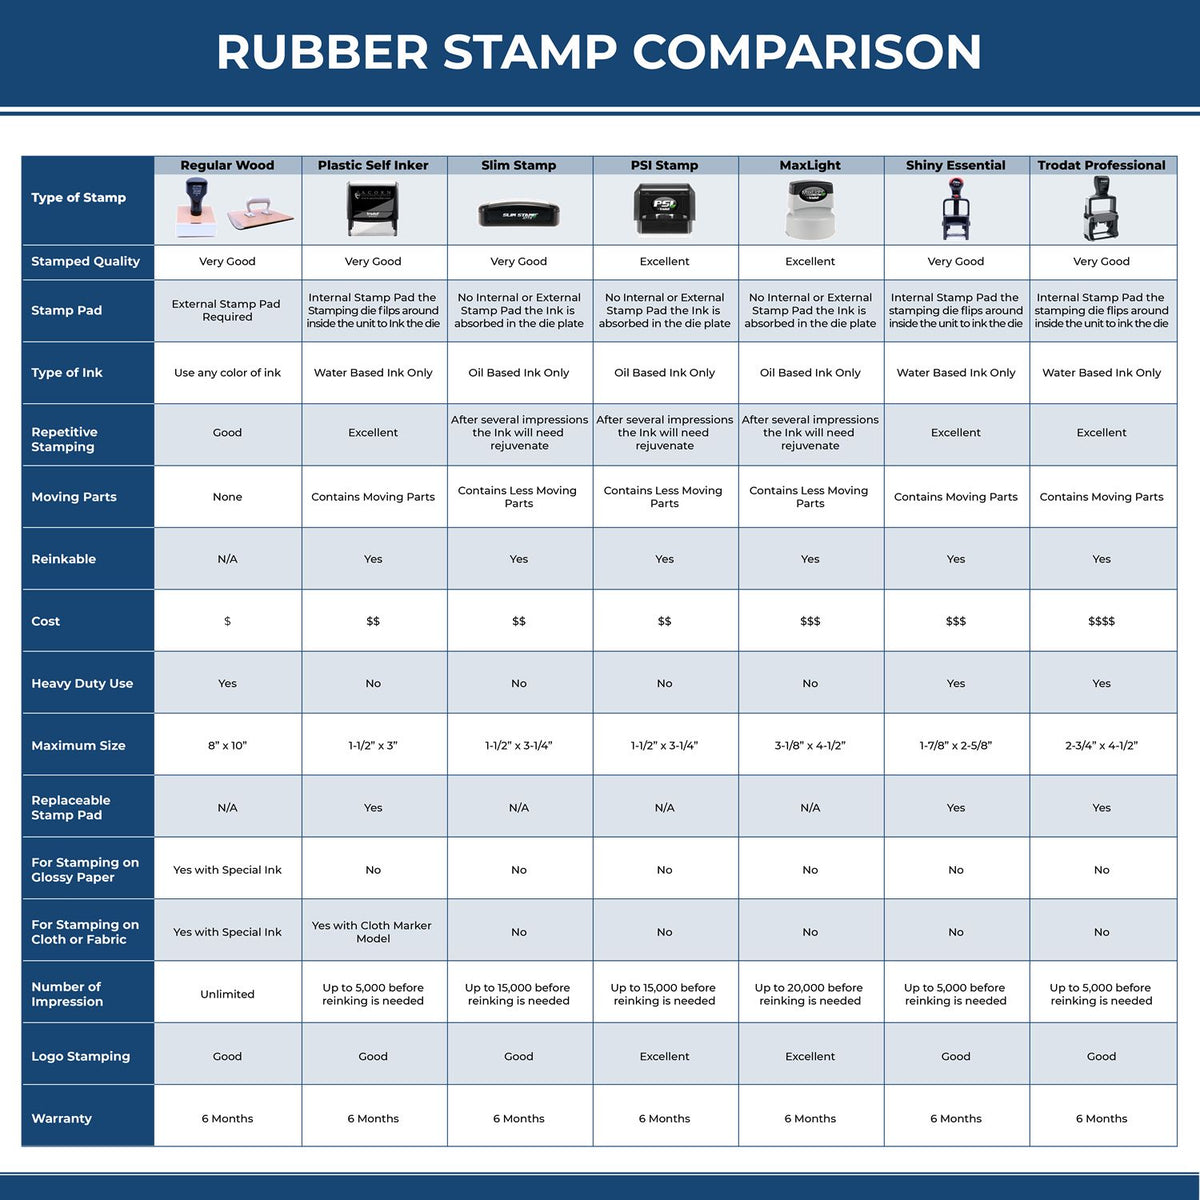 Large Self Inking Anesthesiology Stamp 4540S Rubber Stamp Comparison